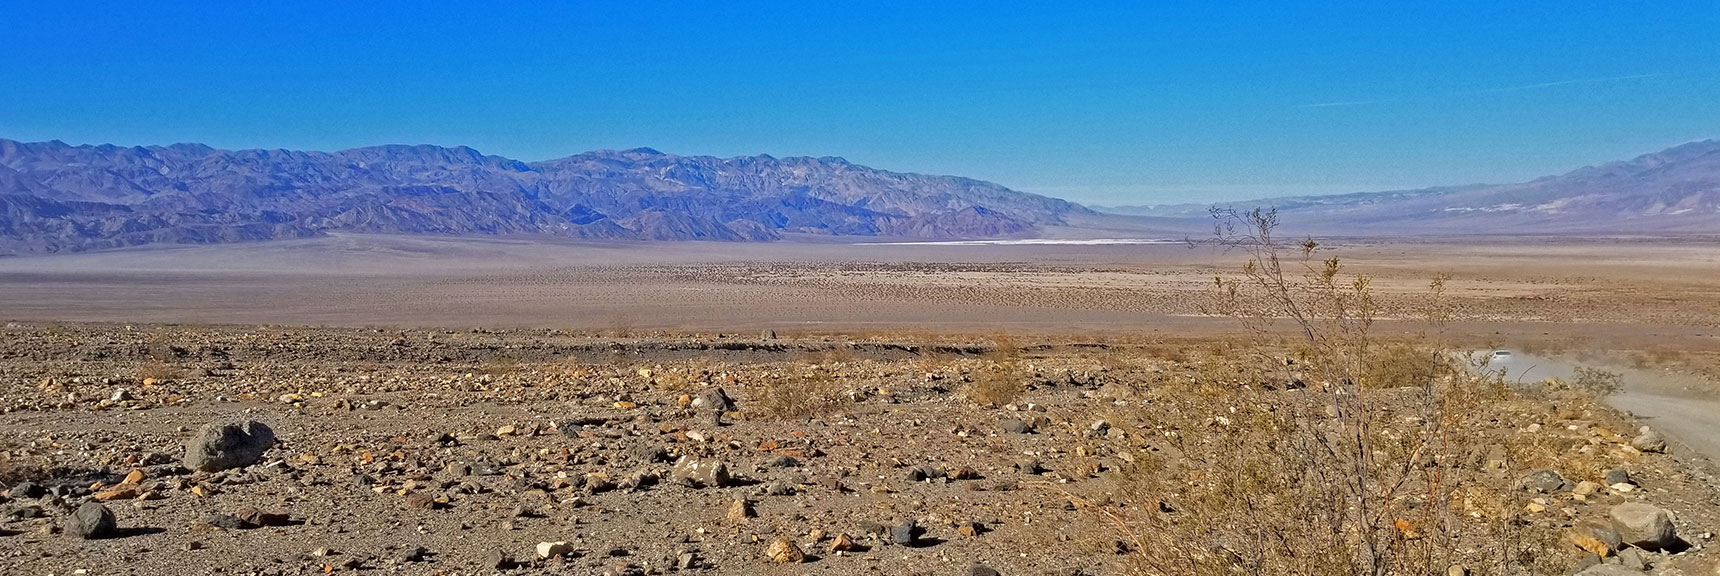 View NW Toward Mountains on West Side of Death Valley | Mosaic Canyon, Above Stovepipe Wells, Death Valley National Park, California